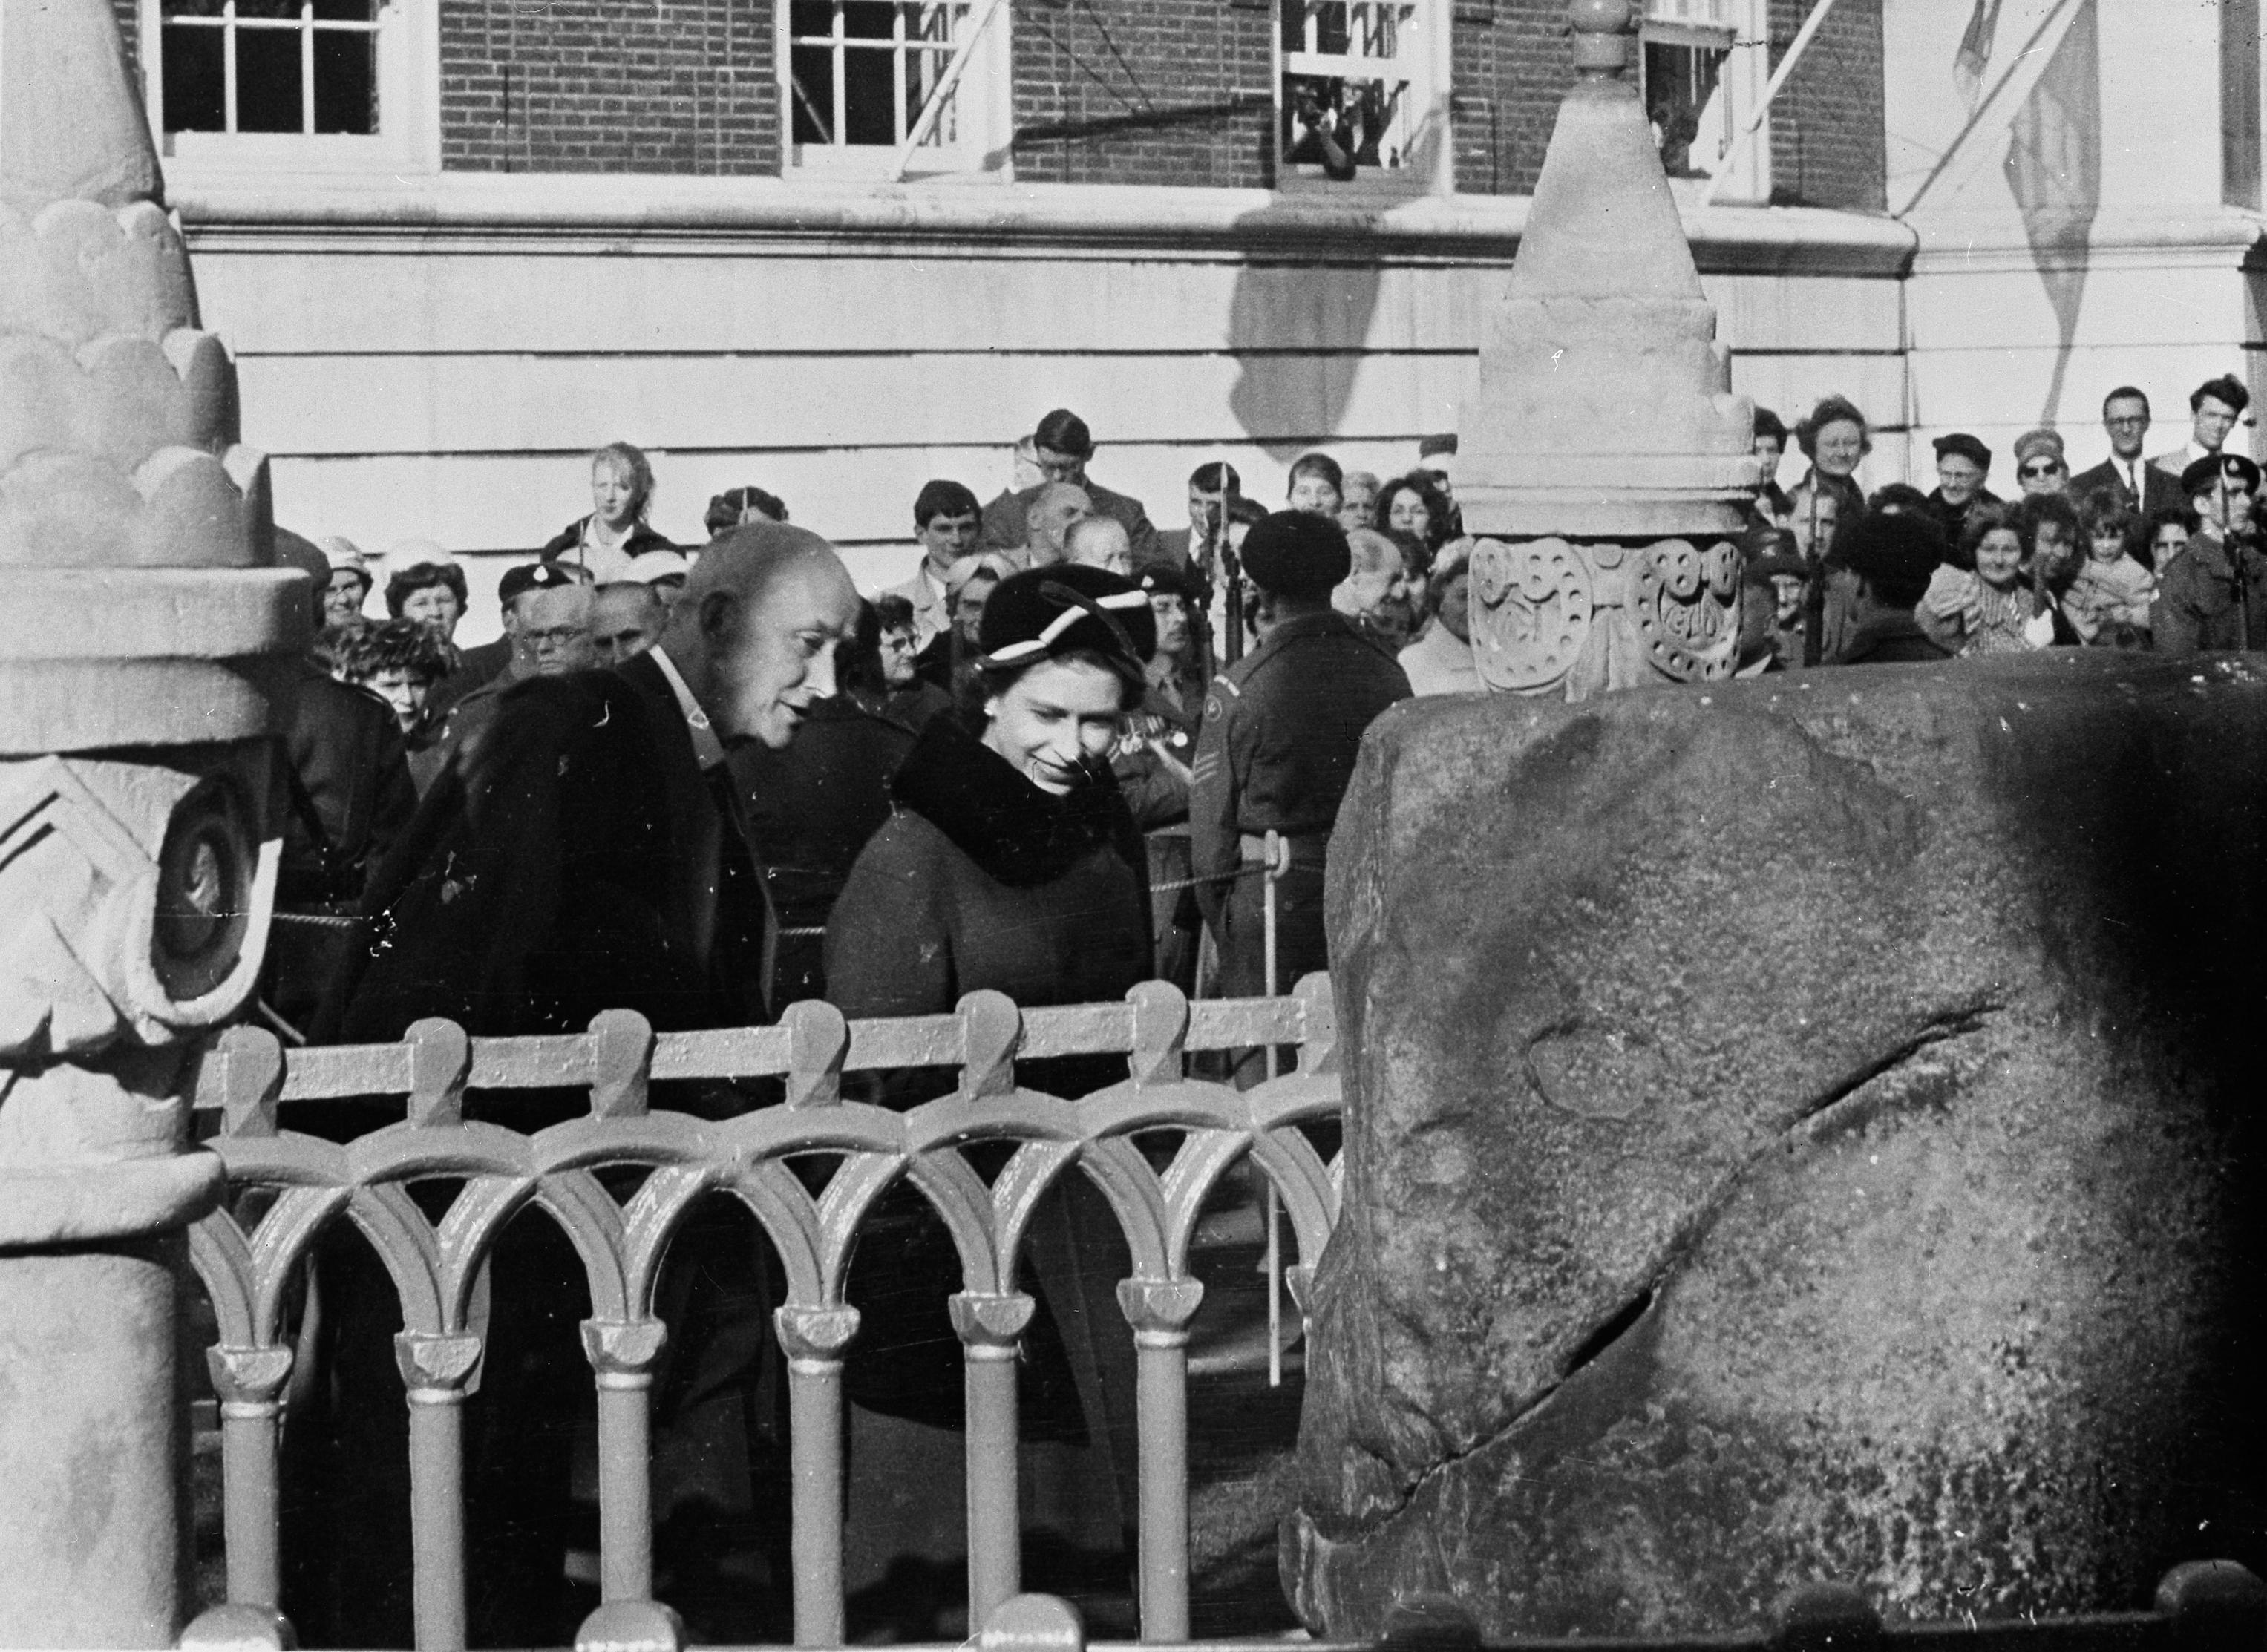 The Queen at the Coronation Stone during her visit to Kingston for the 400th anniversary of Kingston Grammar School